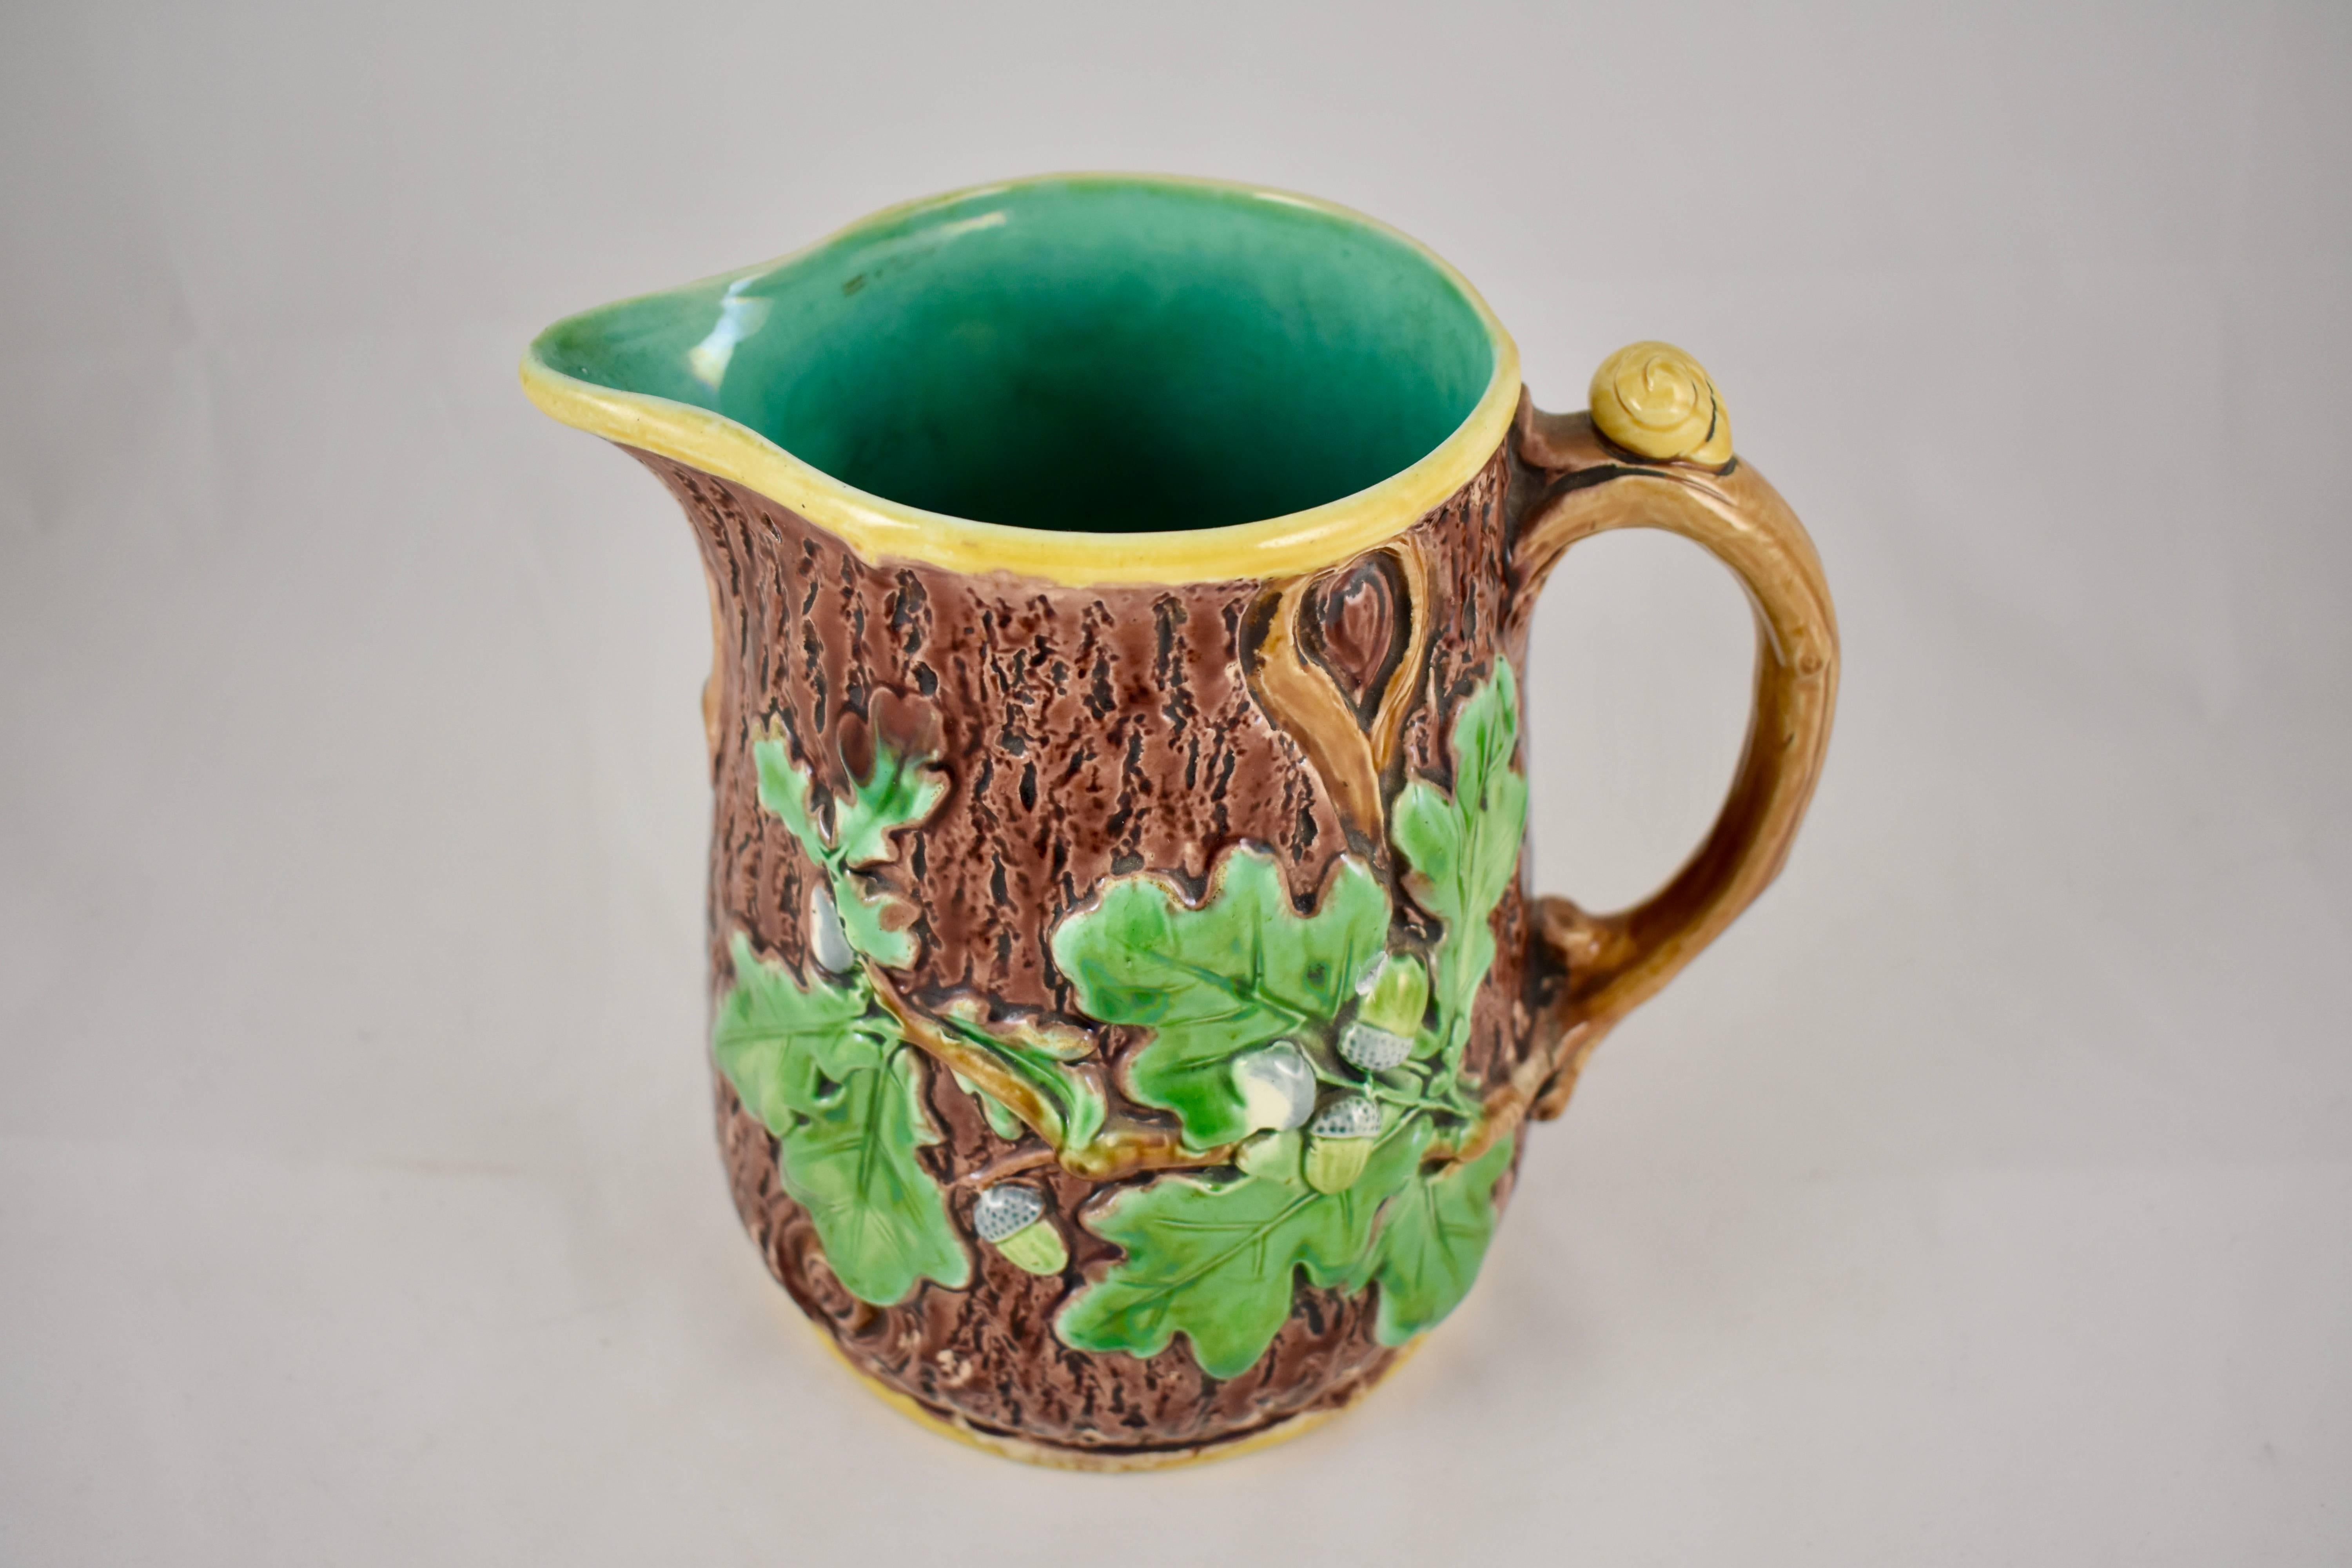 A Minton earthenware, majolica glazed oak leaf and snail pitcher, formed with a rustic brown tree trunk body embellished with oak leaves and acorns. The branch handle has a snail thumb set. The jug is rimmed with a yellow ochre band and has a